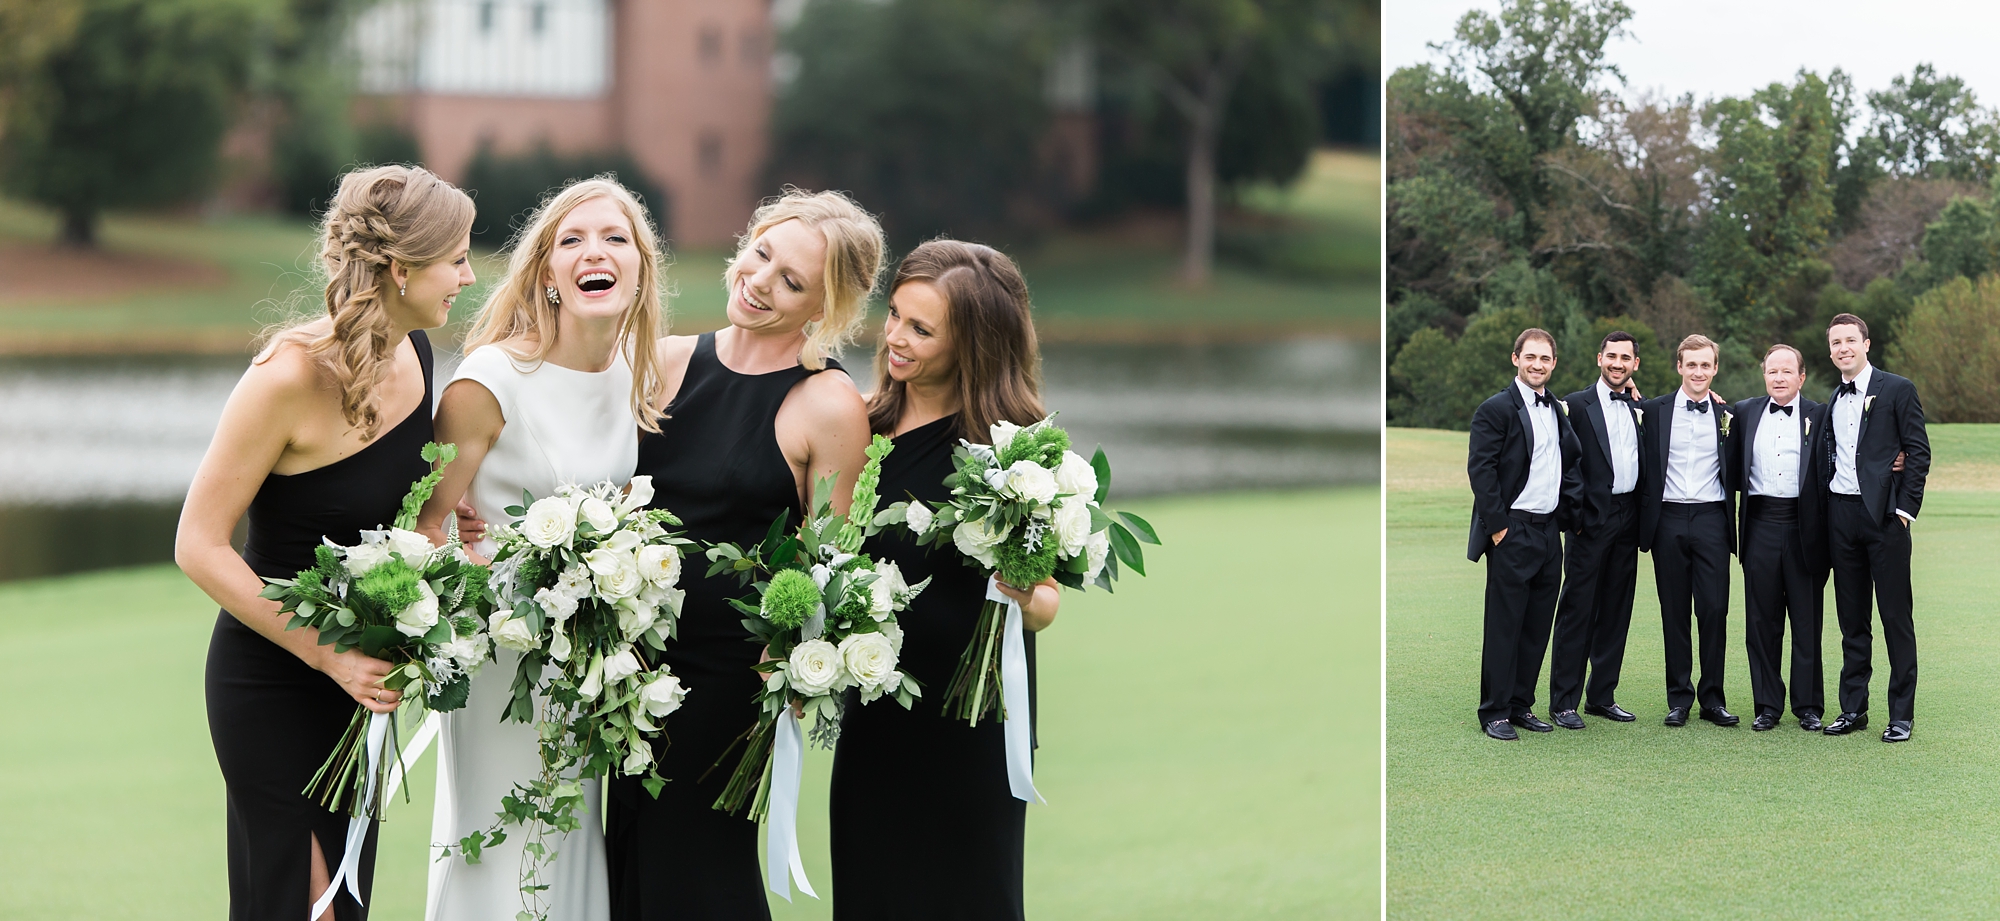 Black and White Bridal Party at East Lake Golf Club by Top Atlanta Wedding Photographers Leigh and Becca